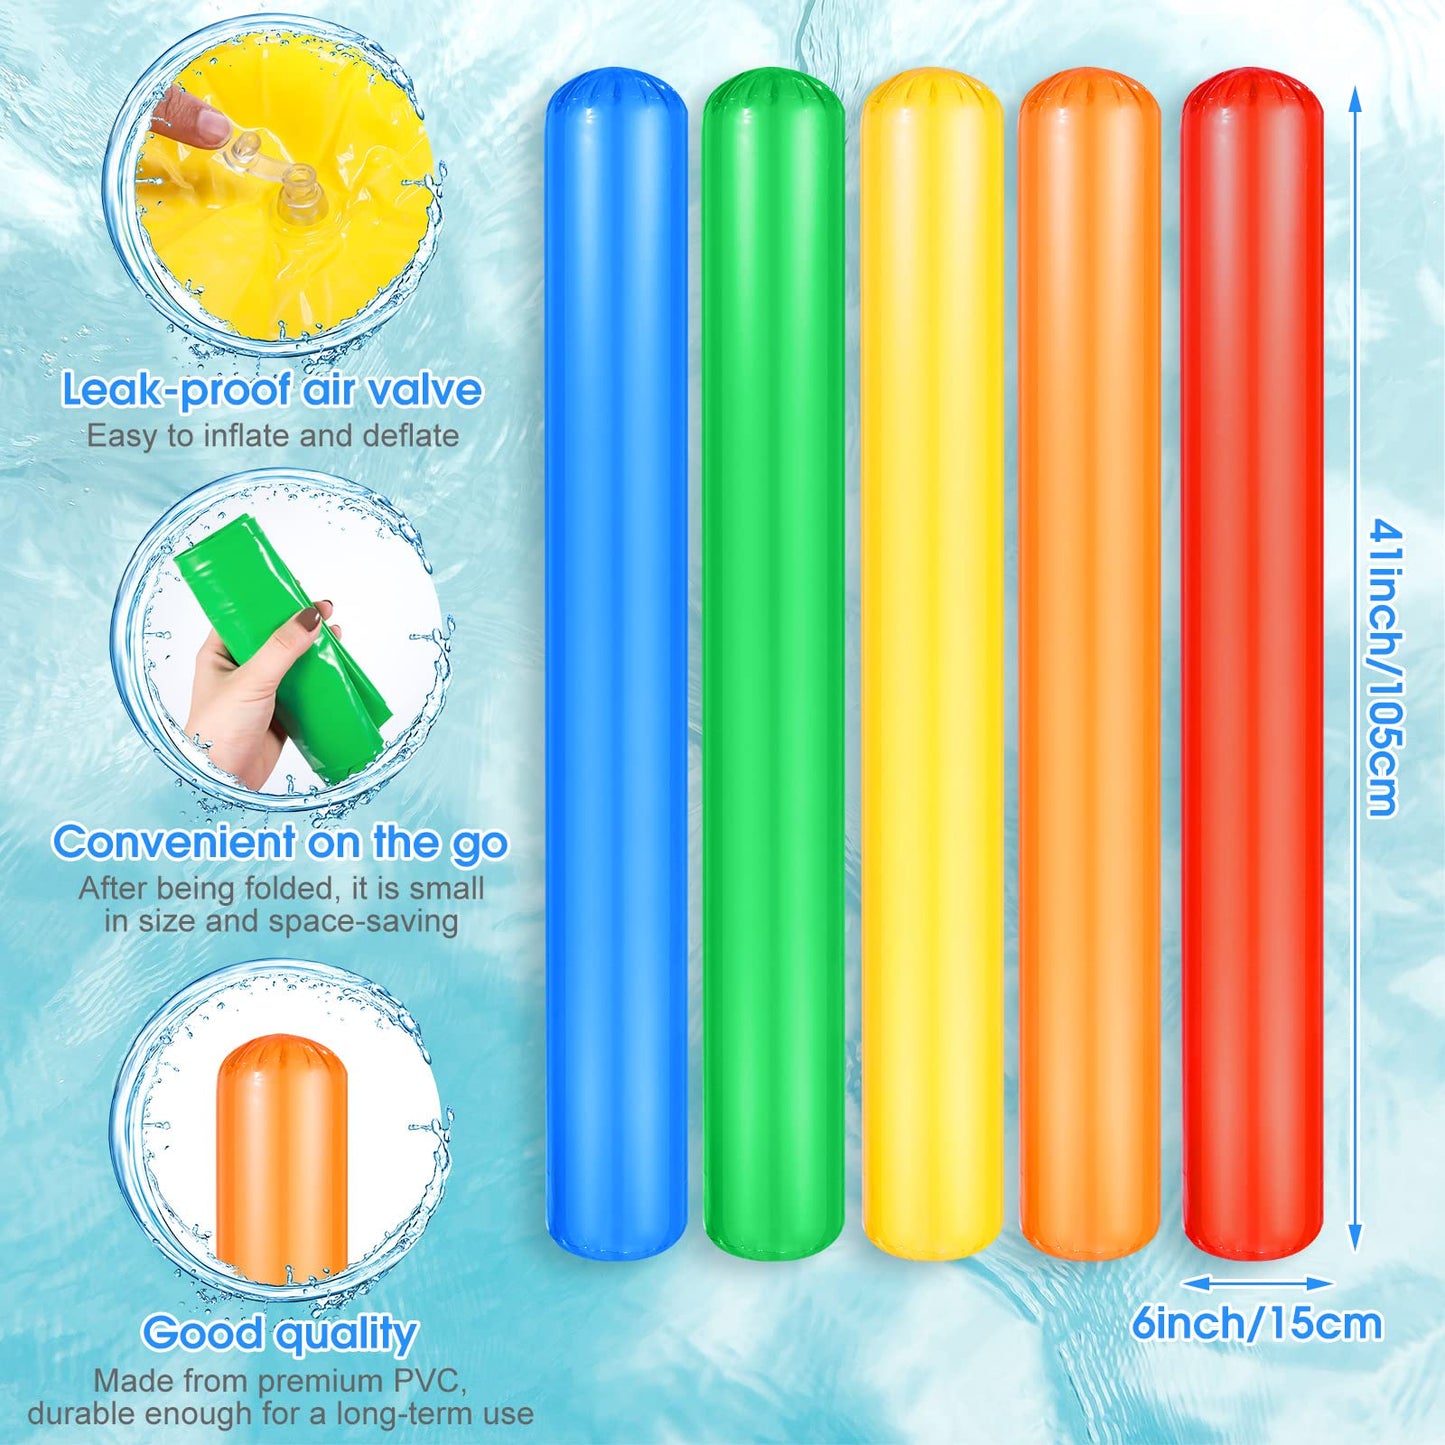 Pool Inflatable Sticks 41.3 Inch Pool Noodles PVC Swimming Noodles Colorful Inflatable Pool Noodle Adults Float Water Noodles Outdoor Water Games Toy for Beaches Swimming Pool Party Decor 15